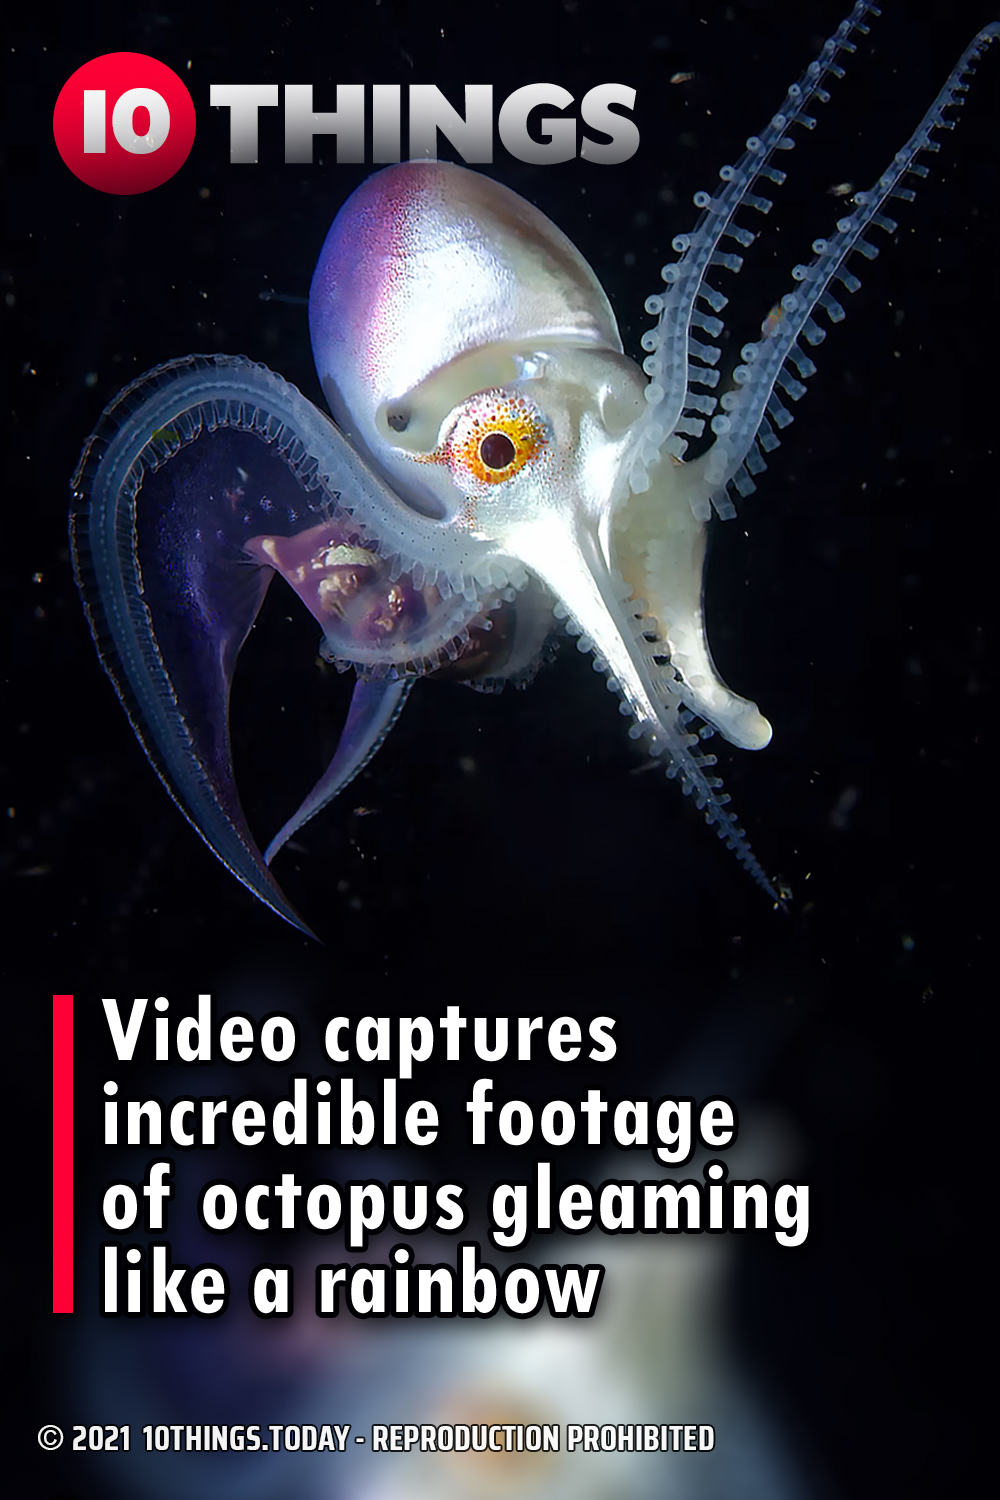 Video captures incredible footage of octopus gleaming like a rainbow